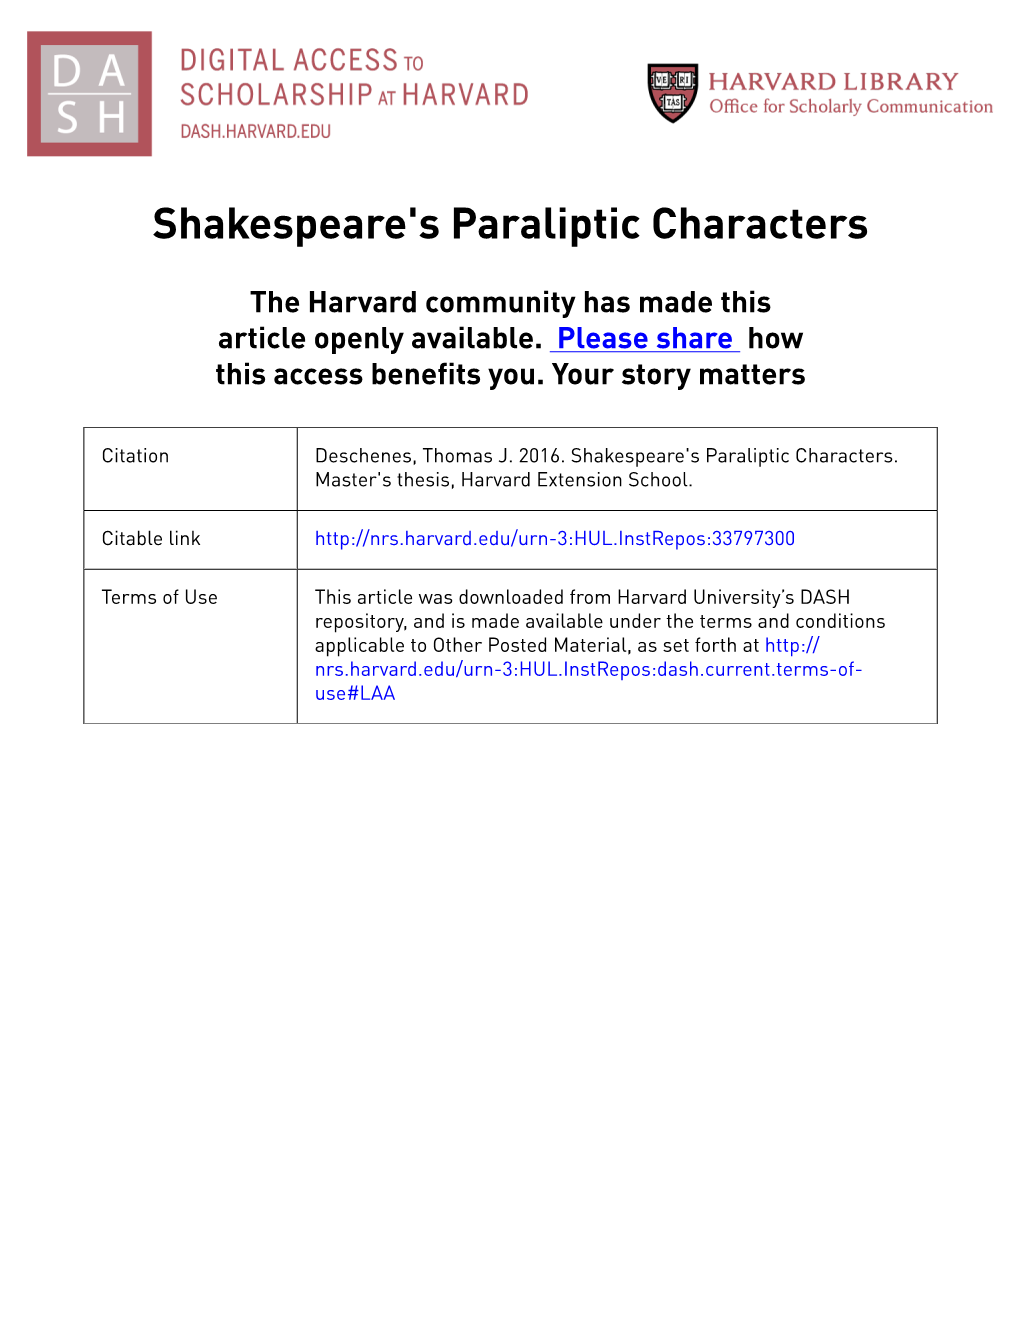 Shakespeare's Paraliptic Characters